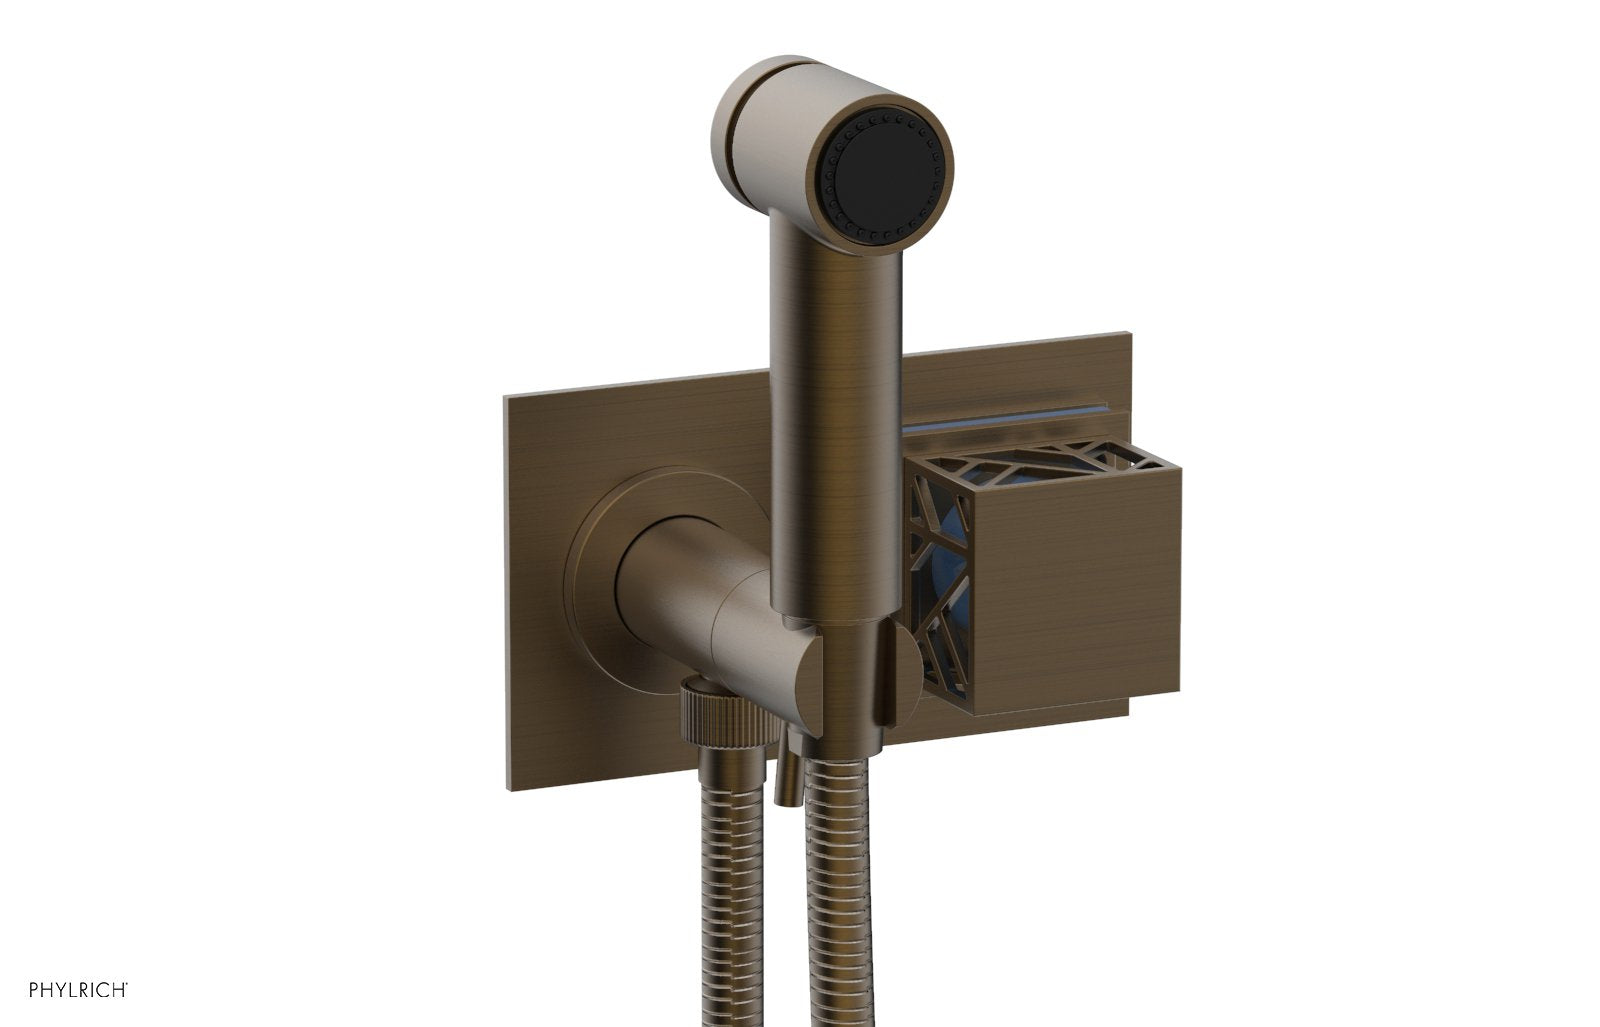 Phylrich JOLIE Wall Mounted Bidet, Square Handle with "Light Blue" Accents